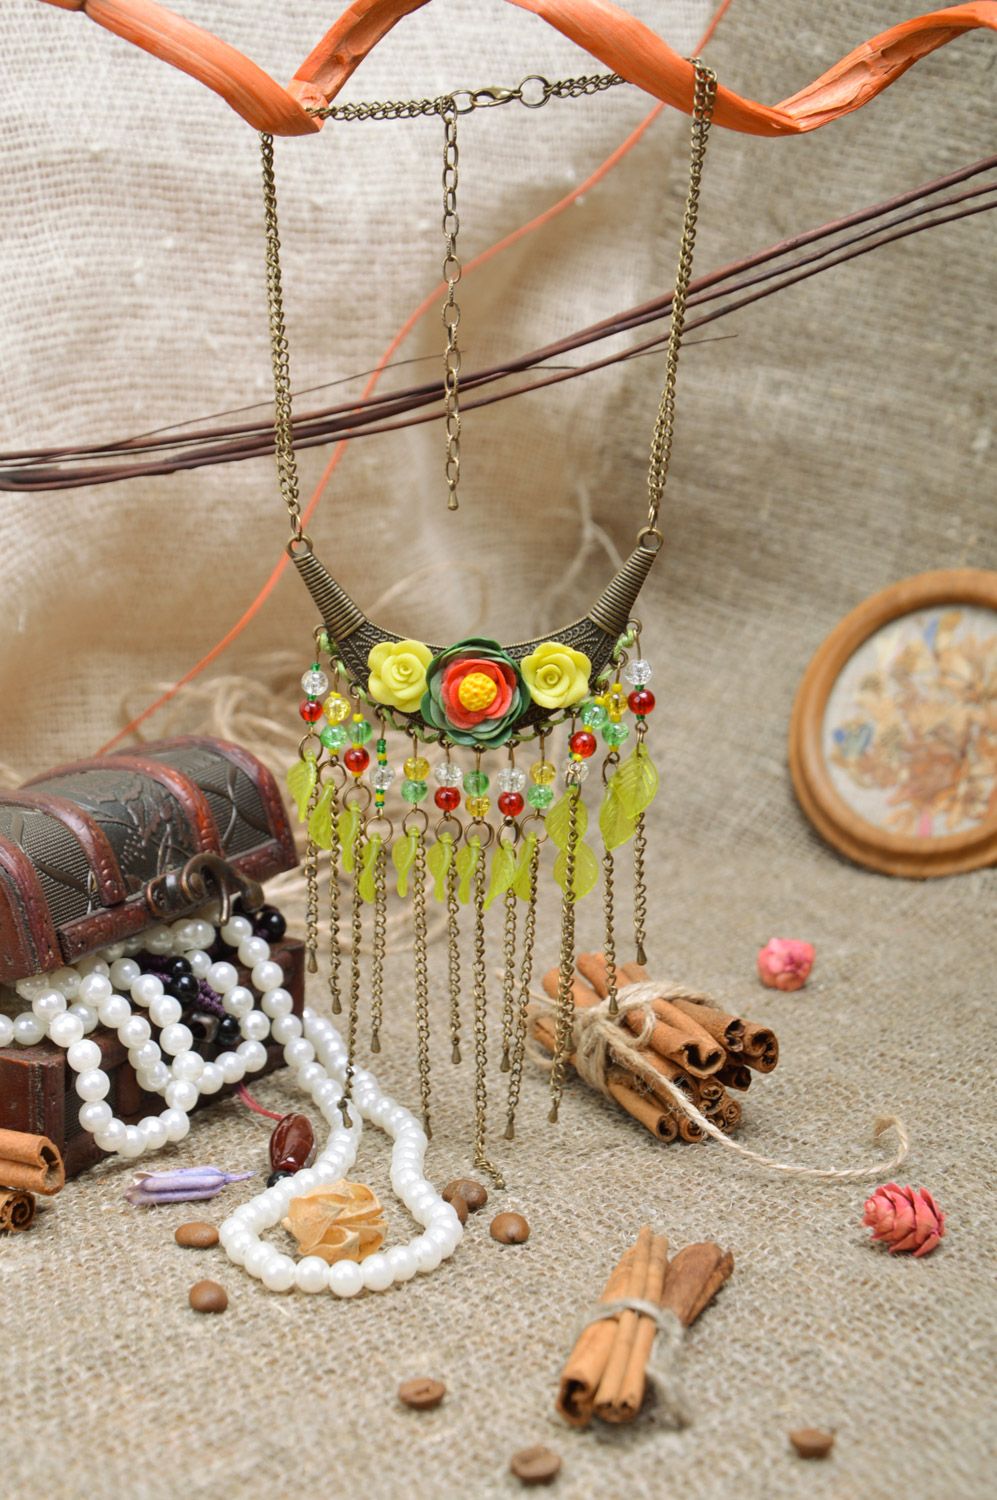 Inspiration - Upcycling Jewellery - Debbie Crothers